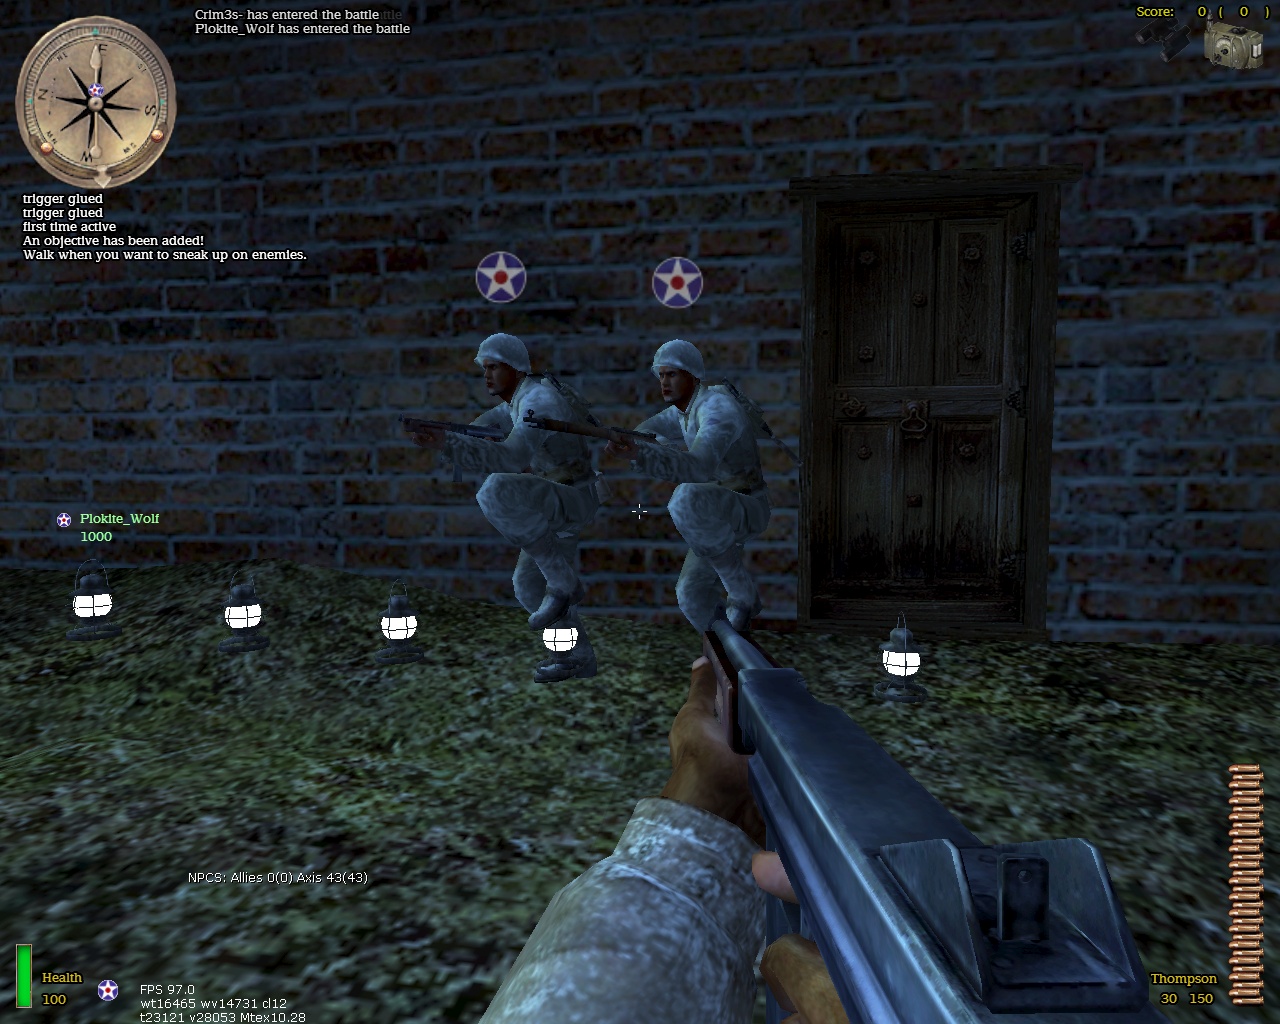 Gtacoop. Medal of Honor мультиплеер. Medal of Honor Allied Assault Breakthrough Mod. Medal of Honor Allied Assault. Medal of Honor 2002 мультиплеер.